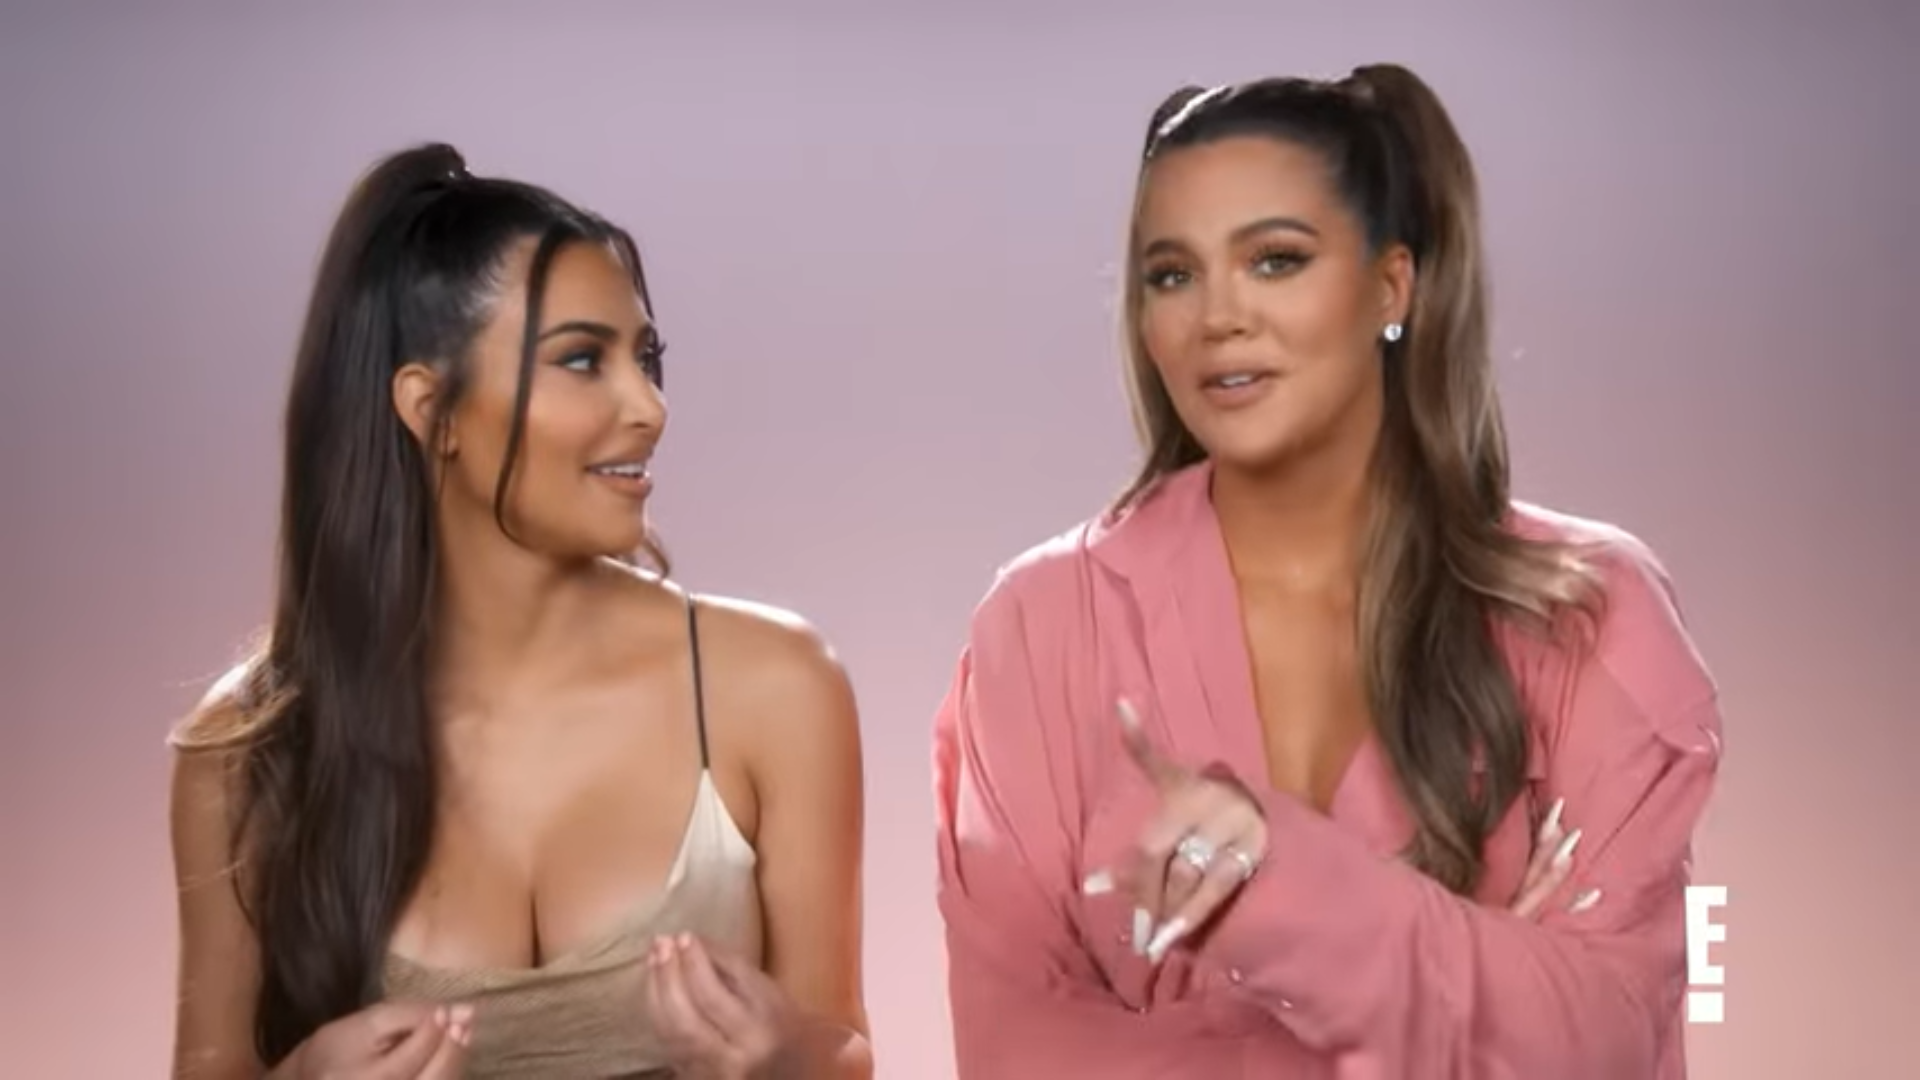 WATCH: Khloe and Kim Kardashian go head-to-head with Kendall and 